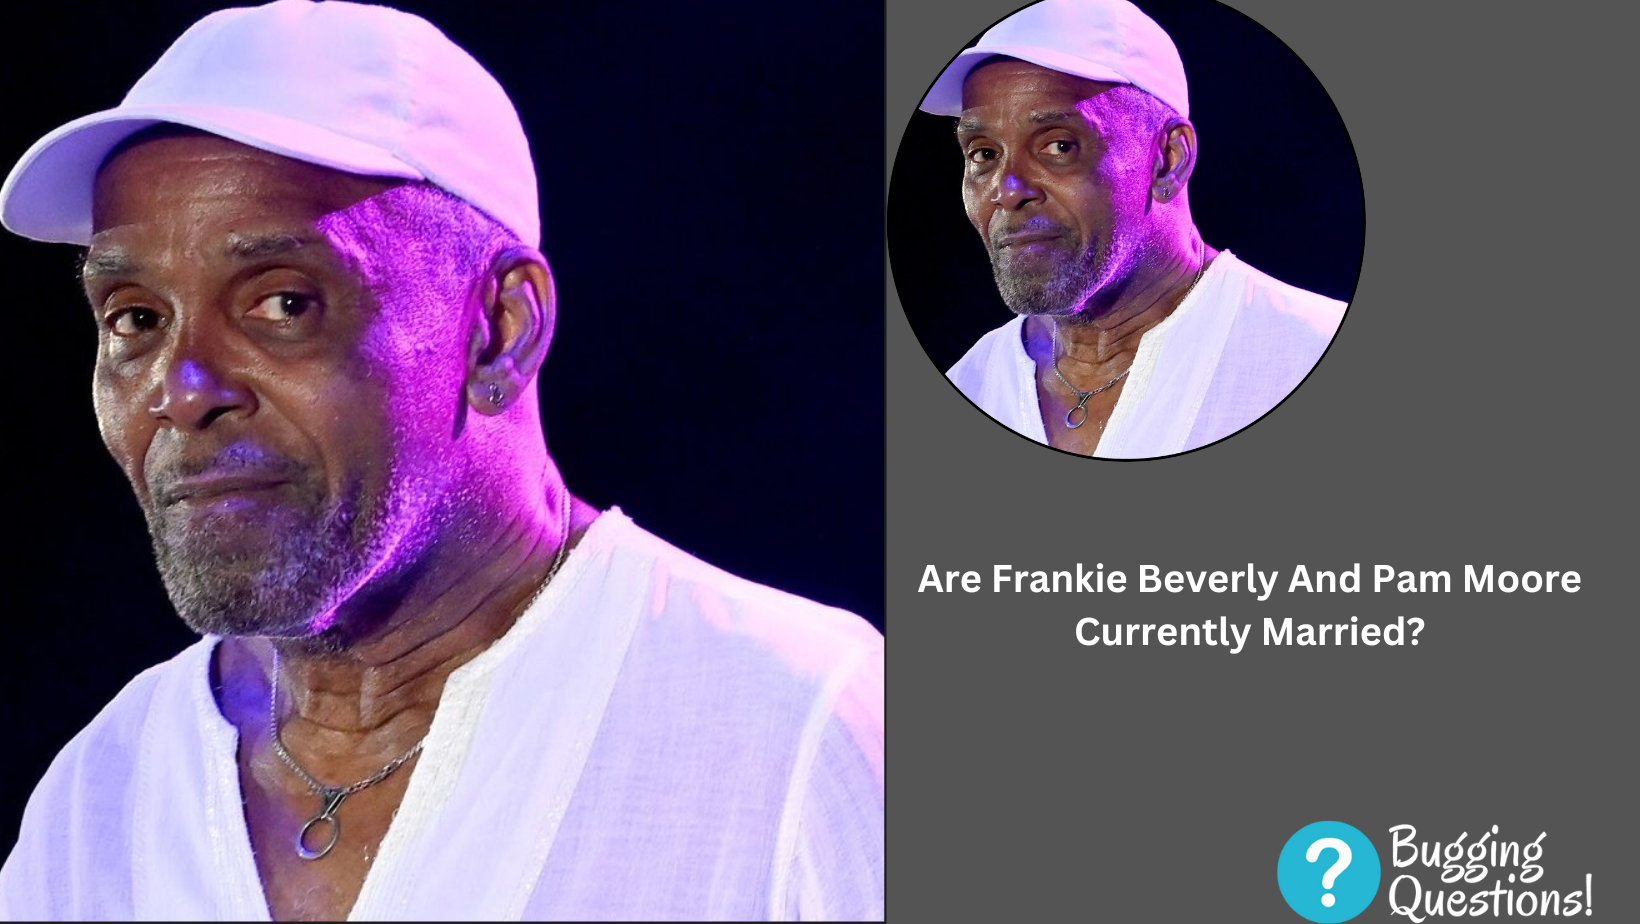 Are Frankie Beverly And Pam Moore Currently Married?